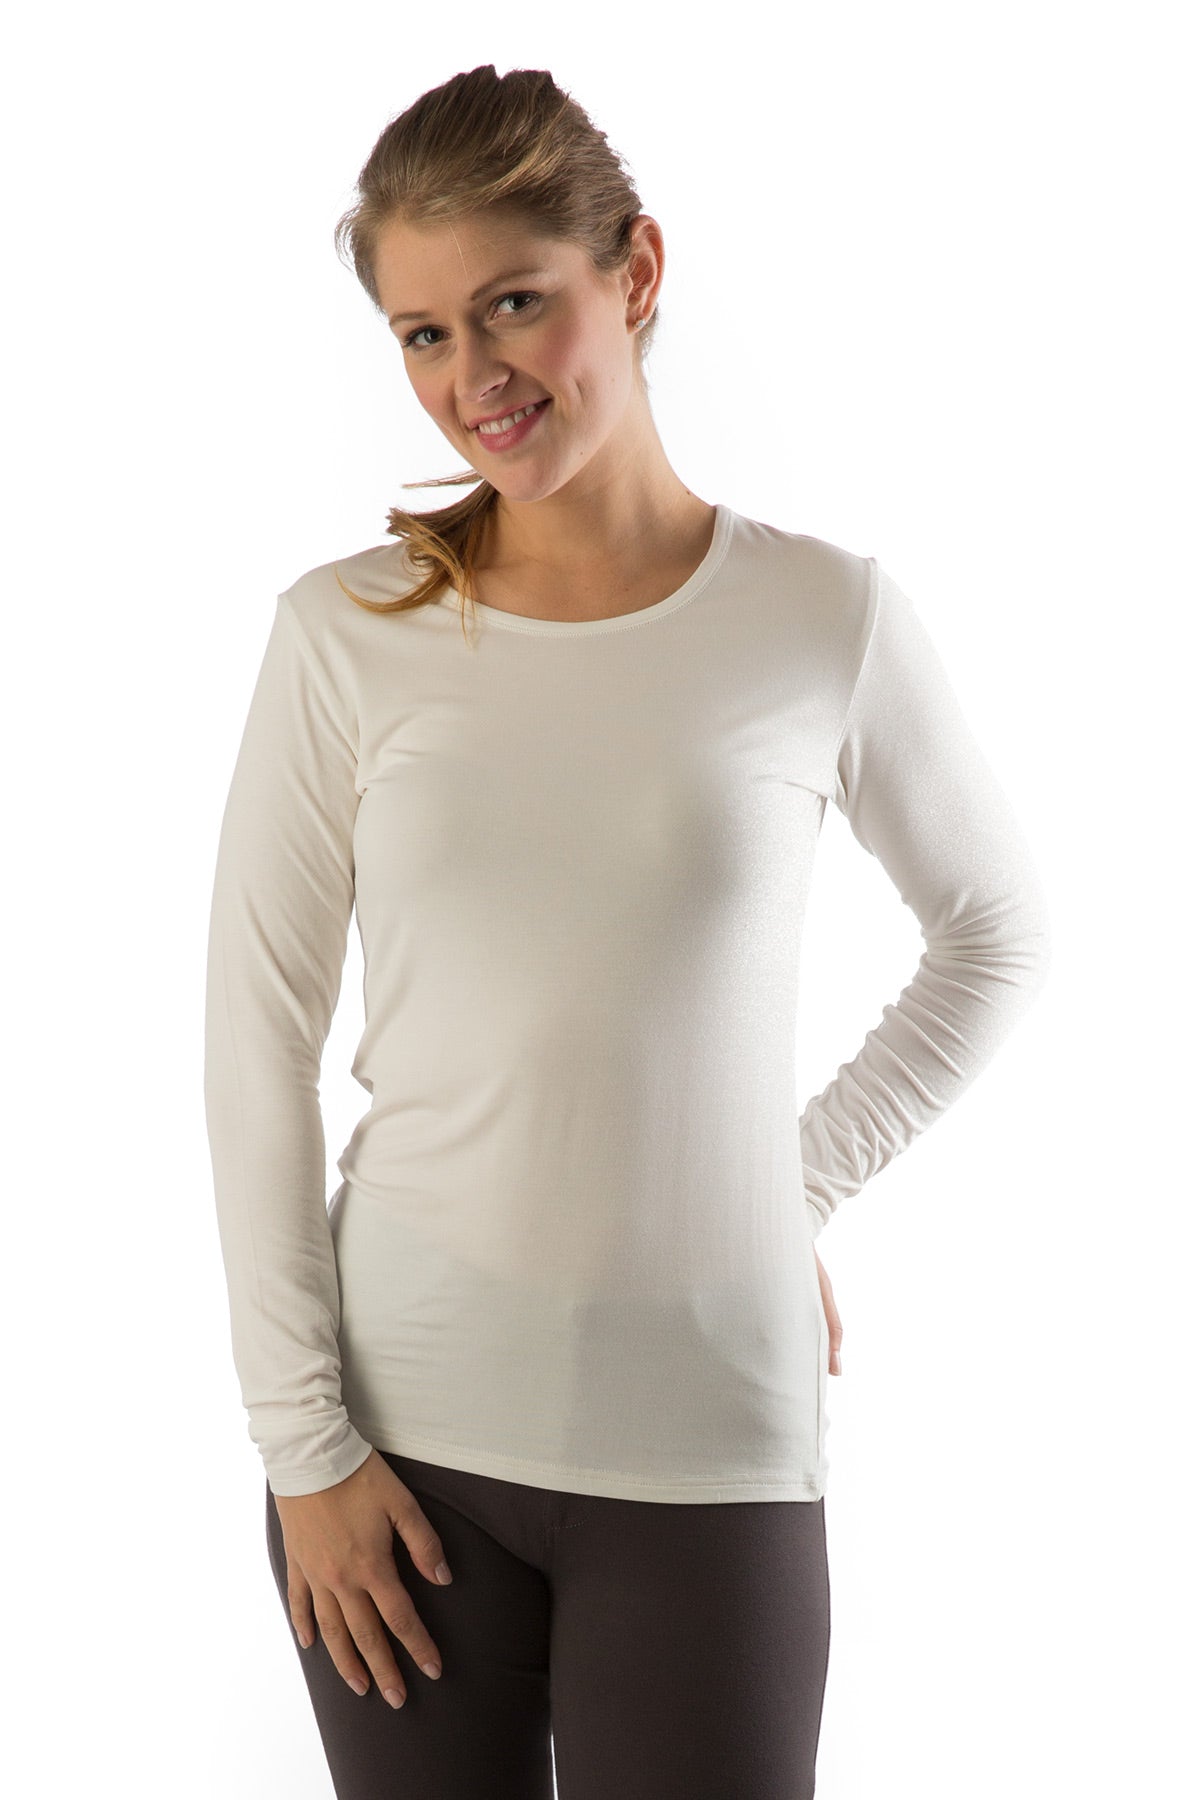 A woman standing and smiling with one hand on her thigh and the other behind her, wearing Yala Natalie Long Sleeve Bamboo Crew Tee Shirt